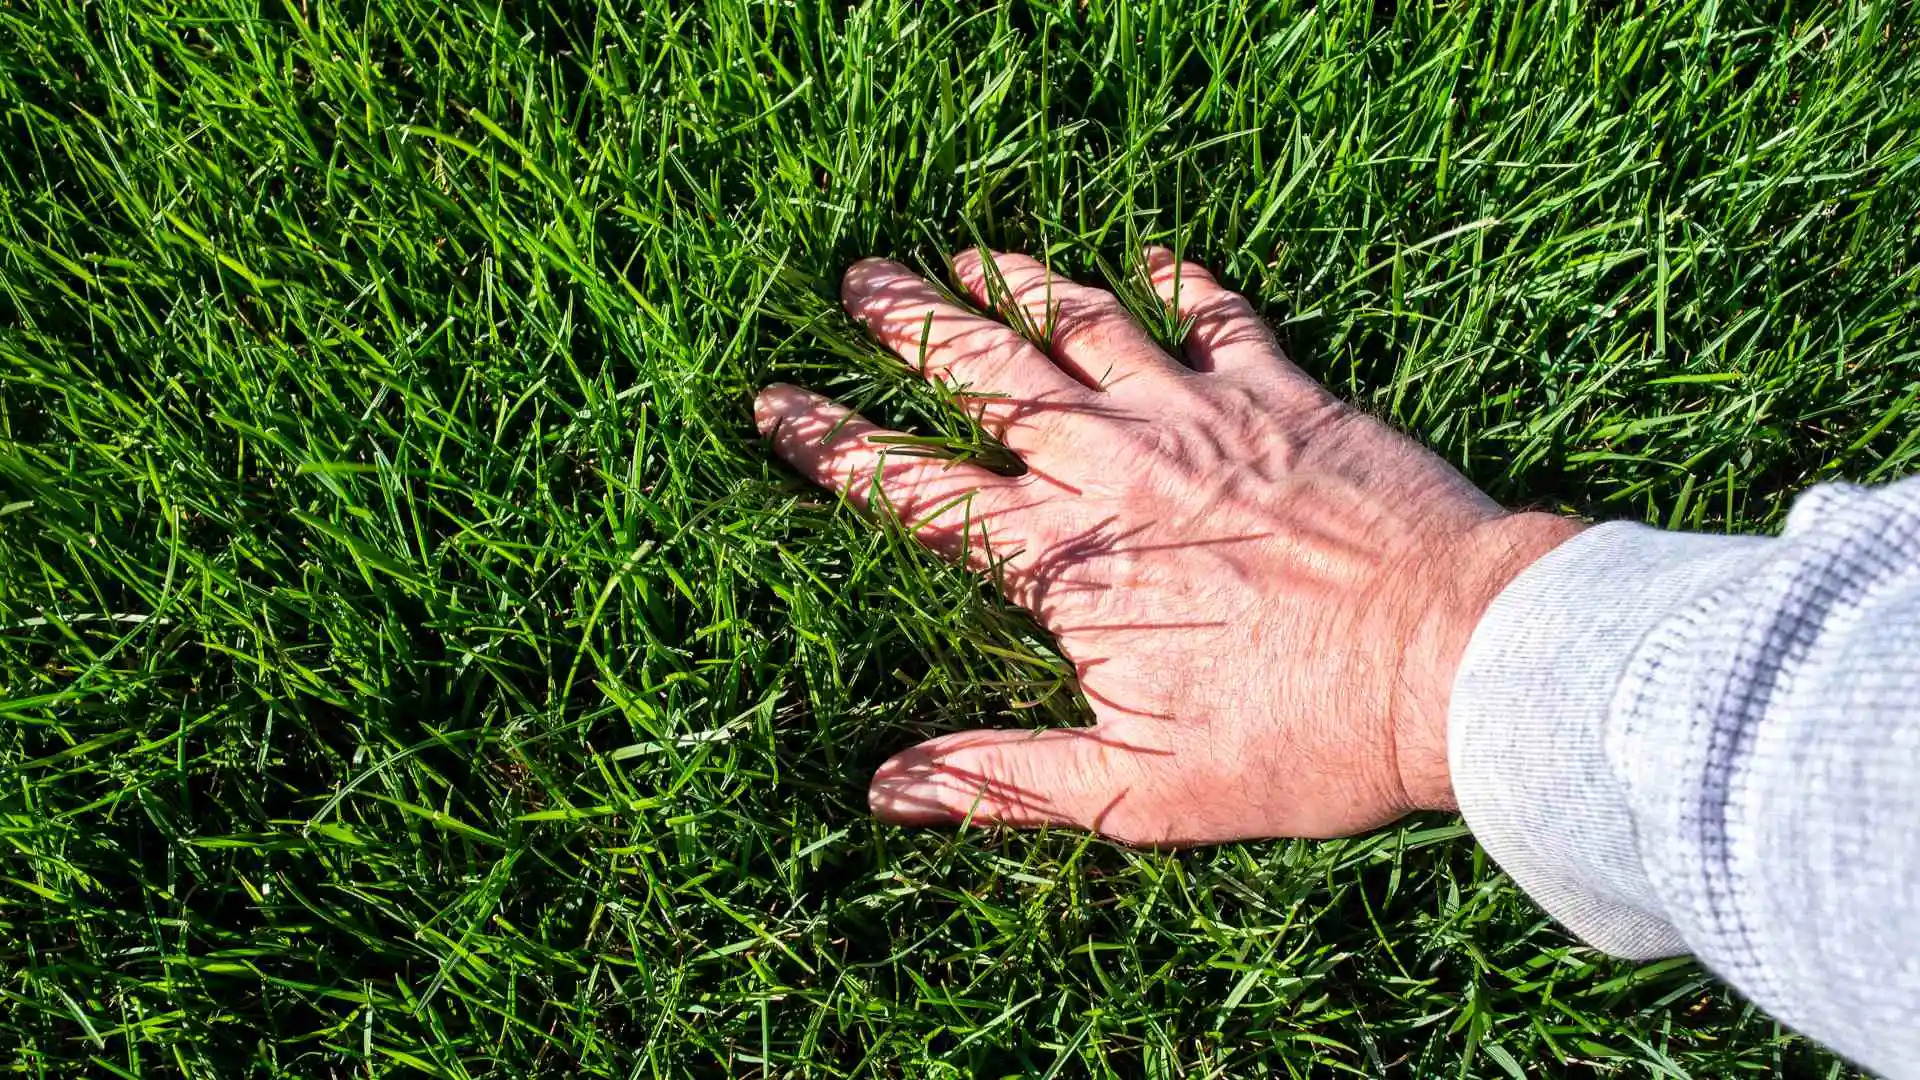 Owner's hand on his lawn feeling the soft, thick grass in Overland Park, KS.